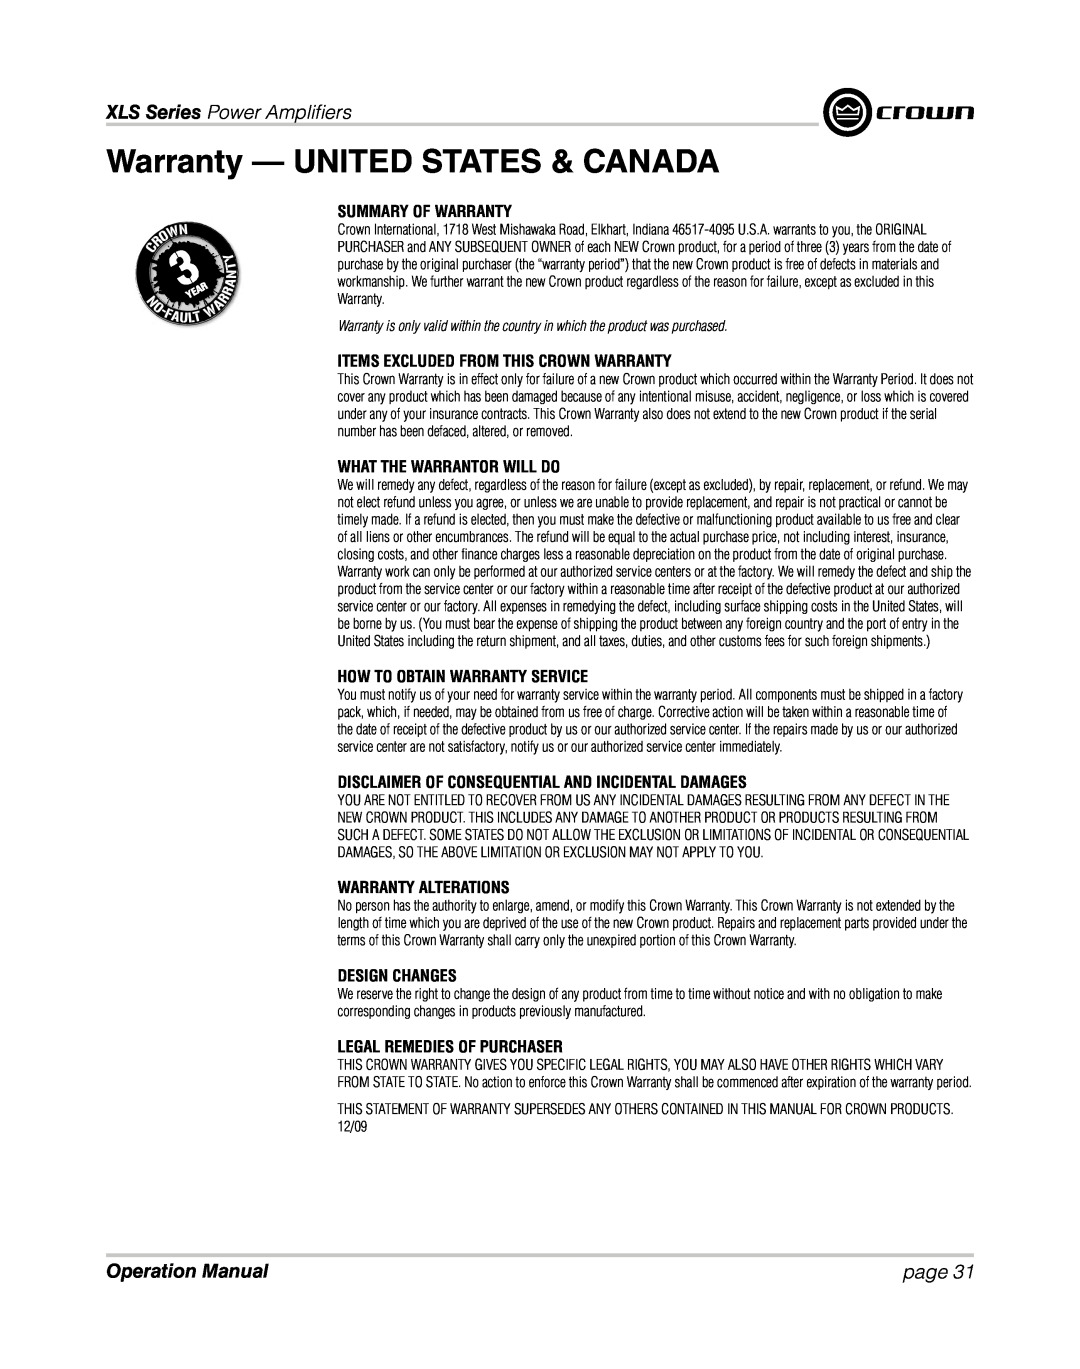 Crown XLS 1000 Warranty - UNITED STATES & CANADA, Summary Of Warranty, Items Excluded From This Crown Warranty, page 